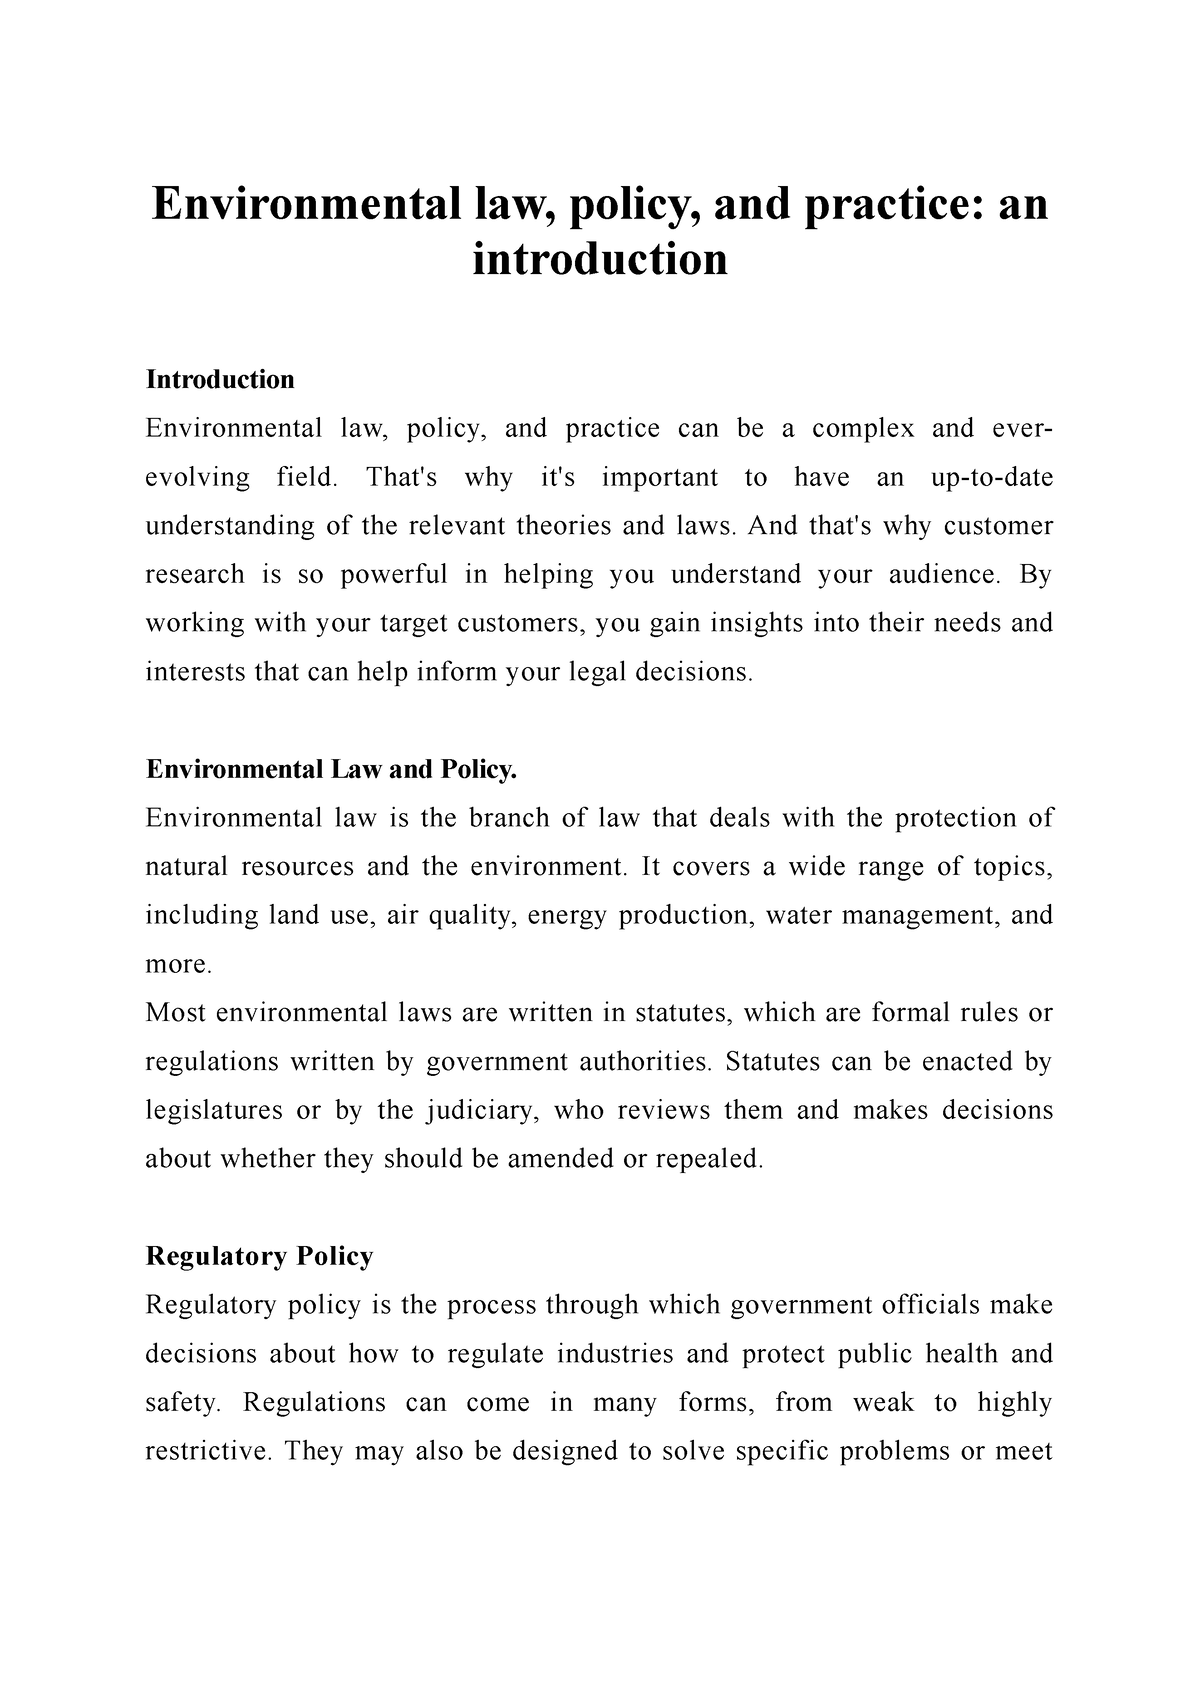 thesis on environmental policies